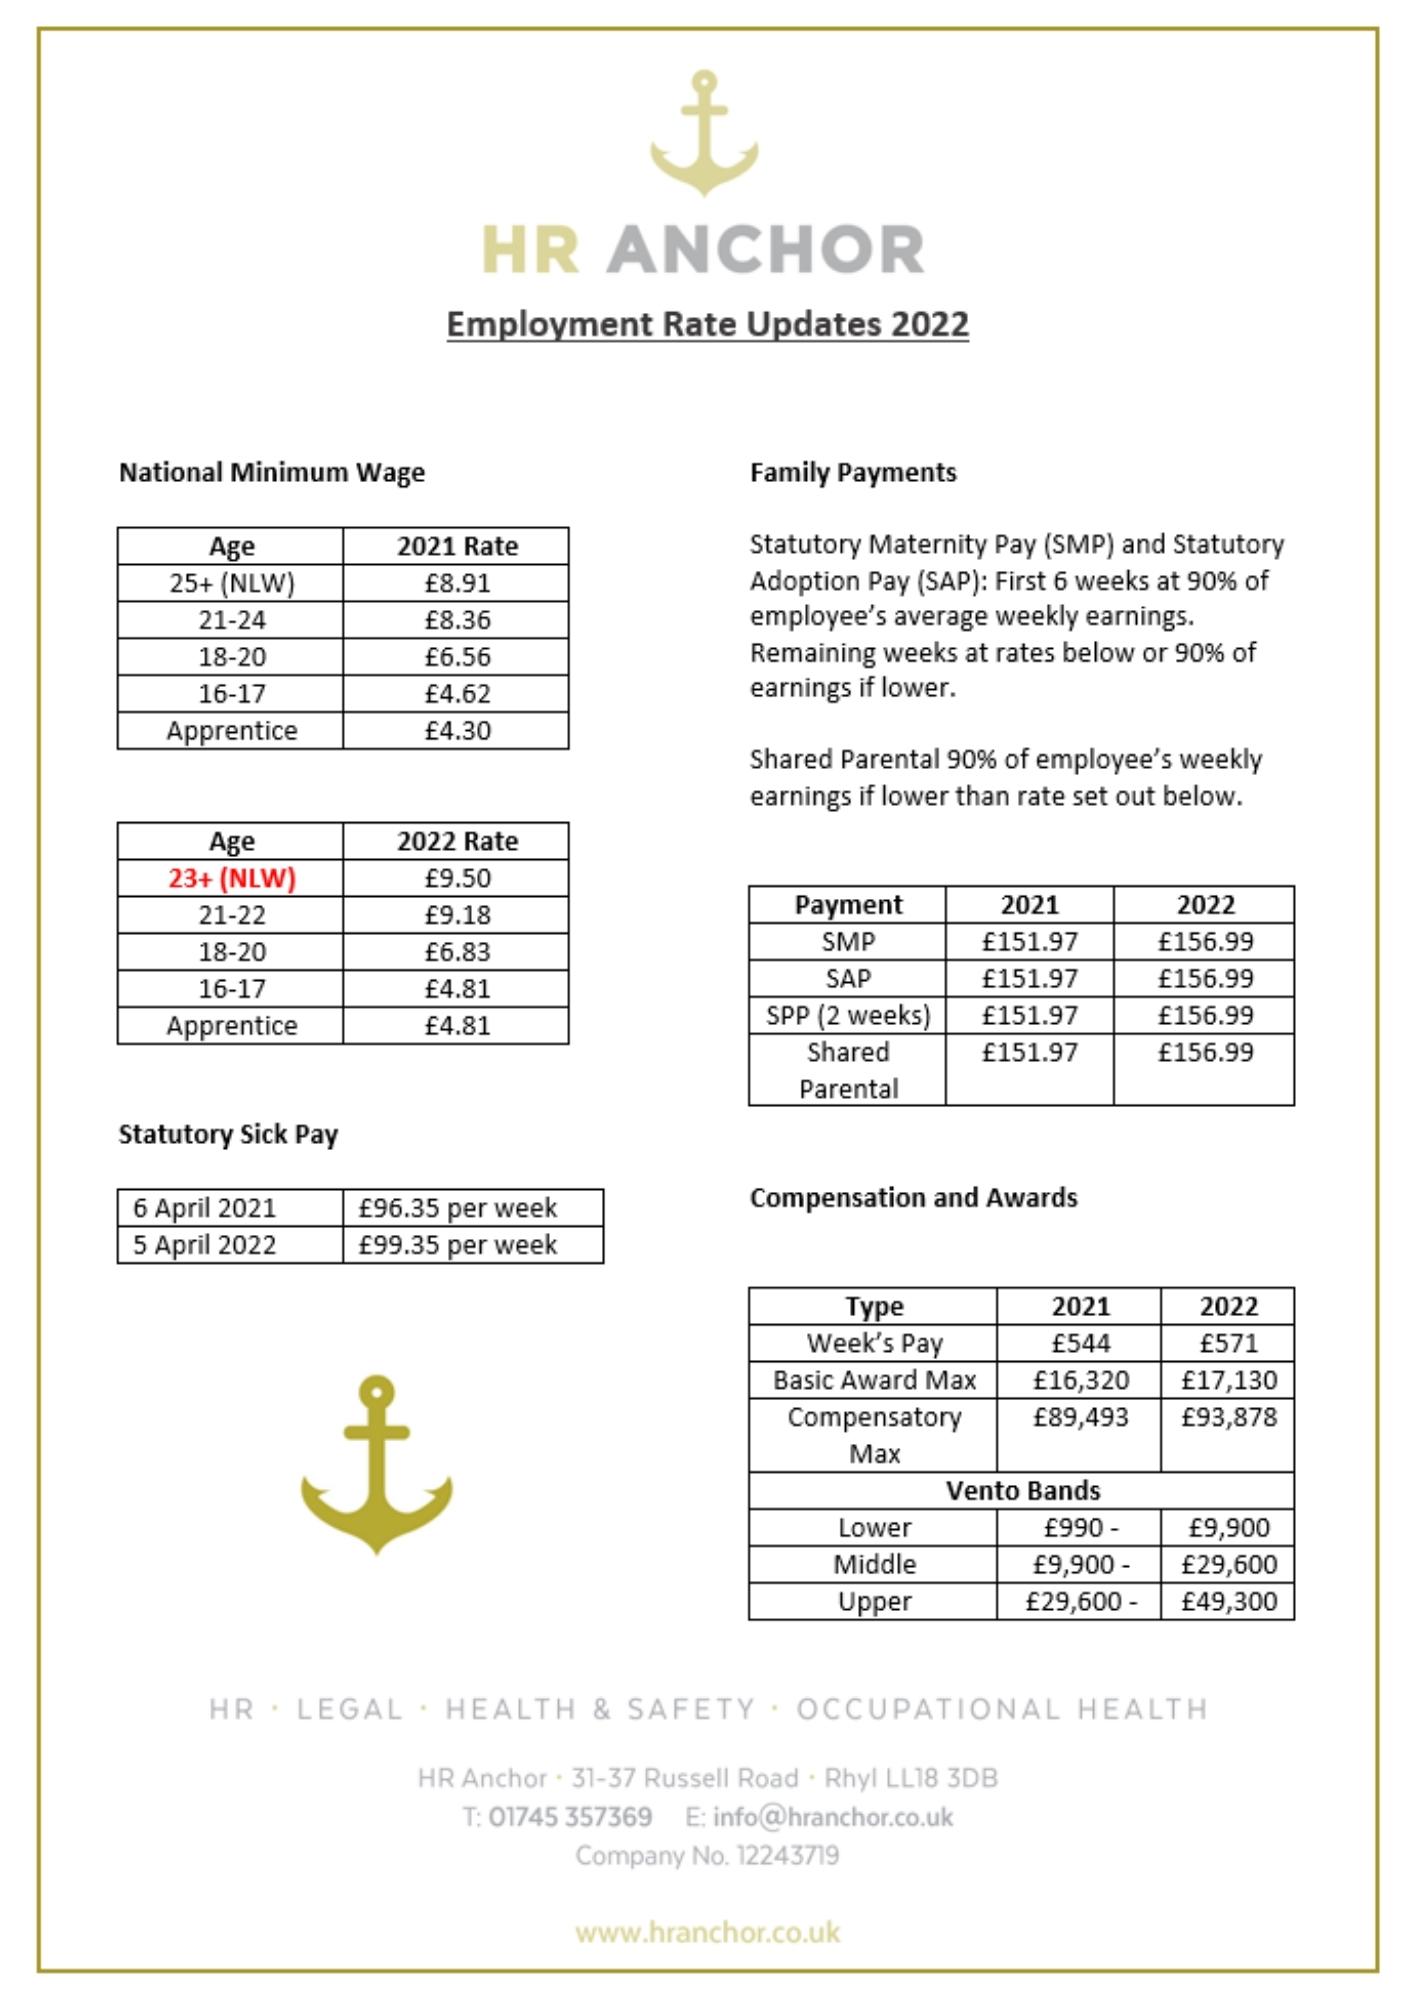 Table detailing updated employment rates for 2022